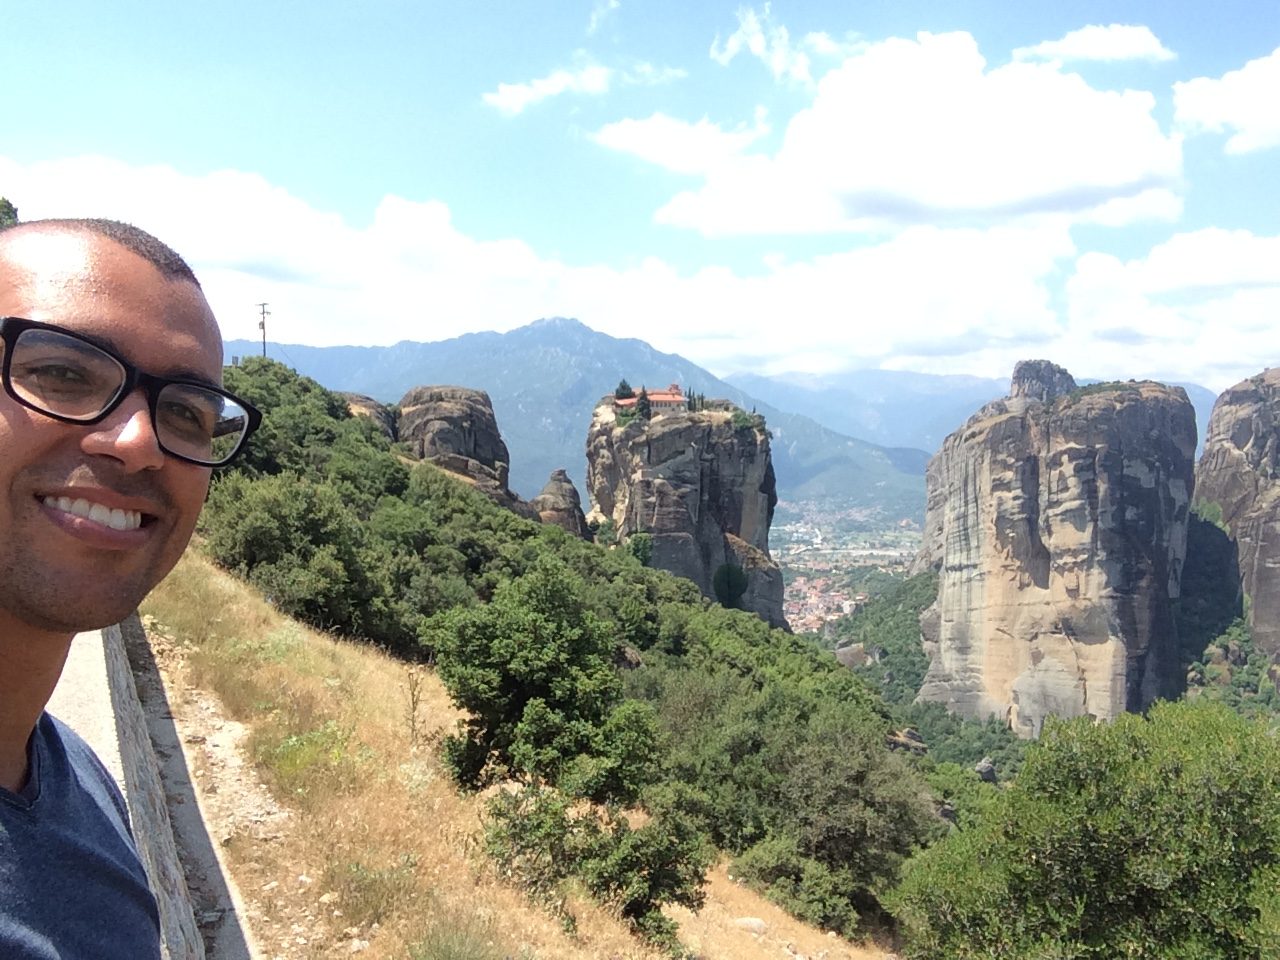 meteora greece james bond for your eyes only